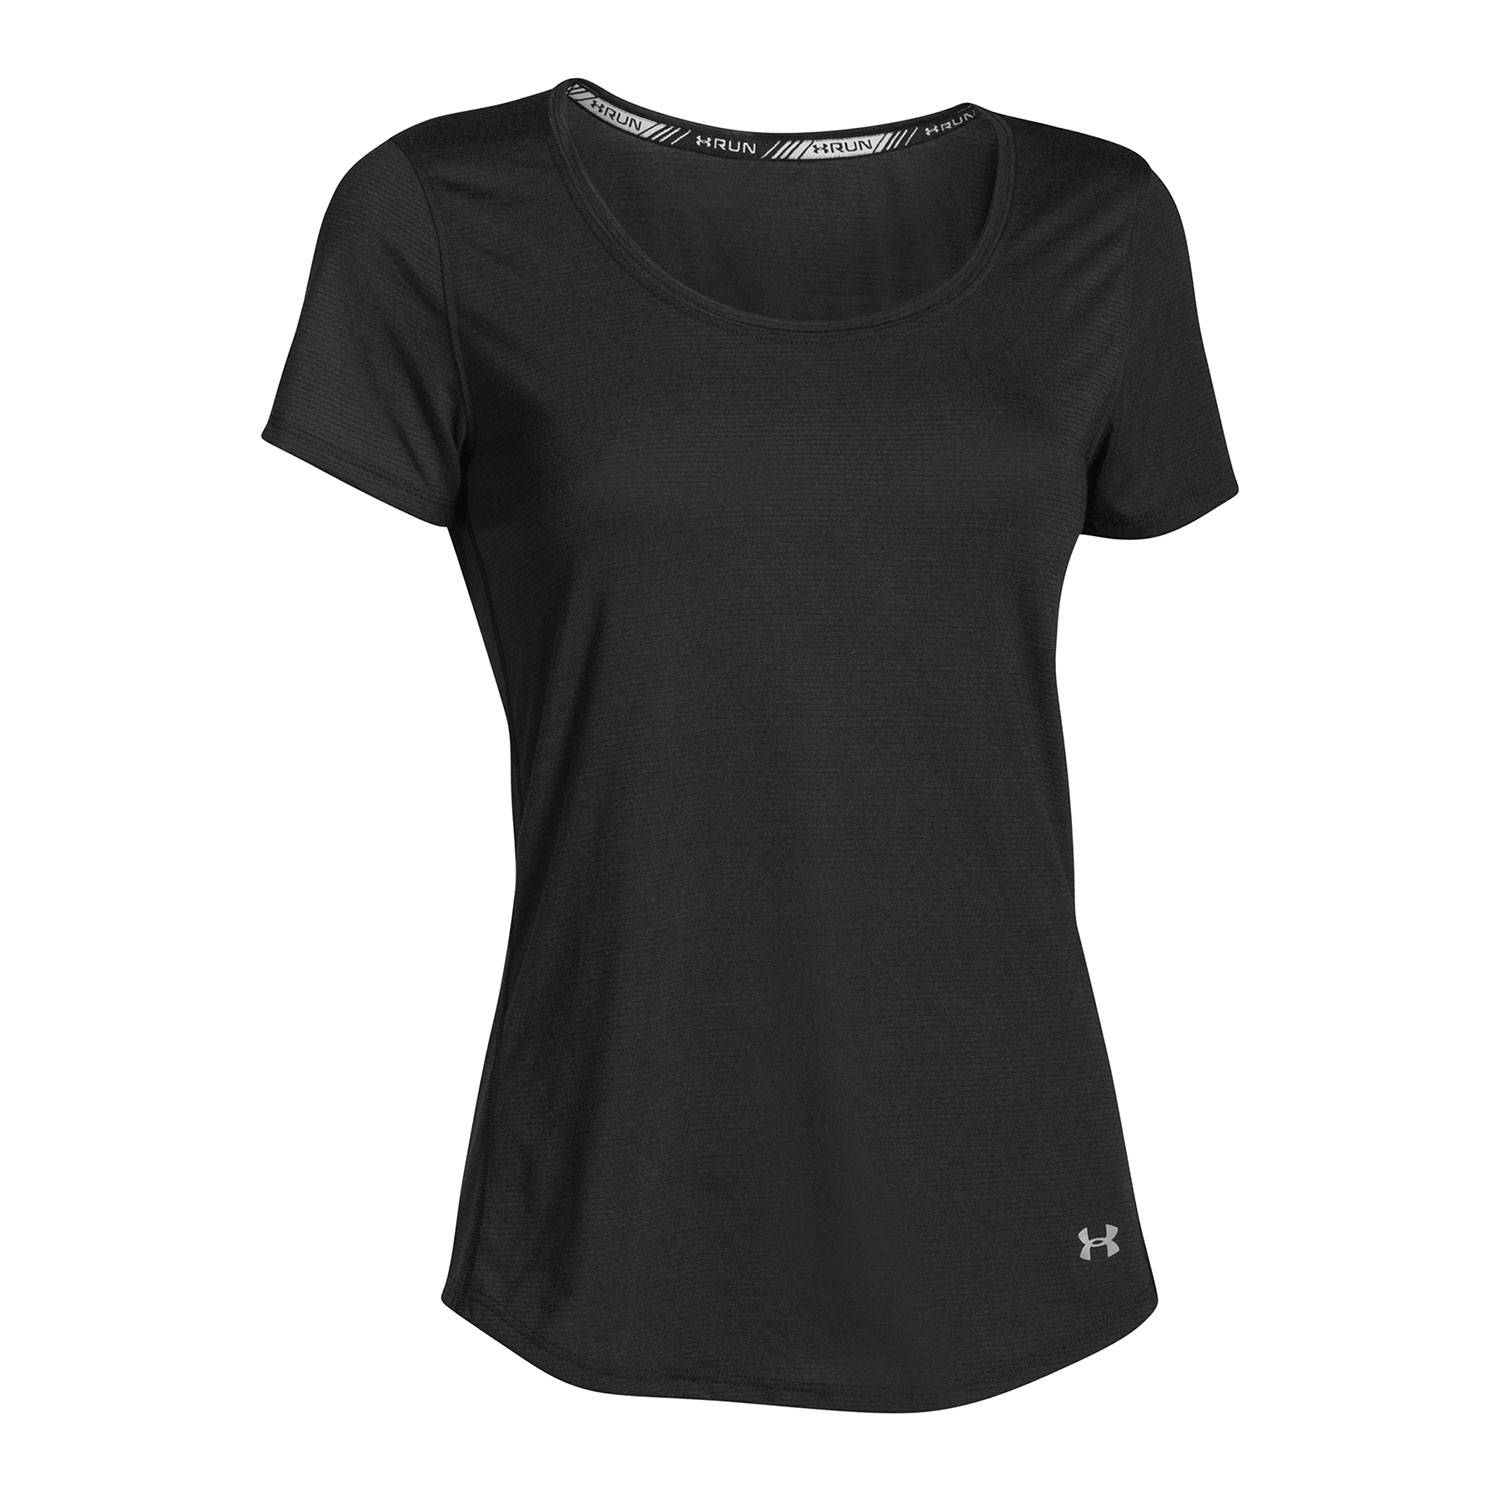 UNDER ARMOUR WOMEN'S CHARGED NLS SHORT SLEEVE T-SHIRT